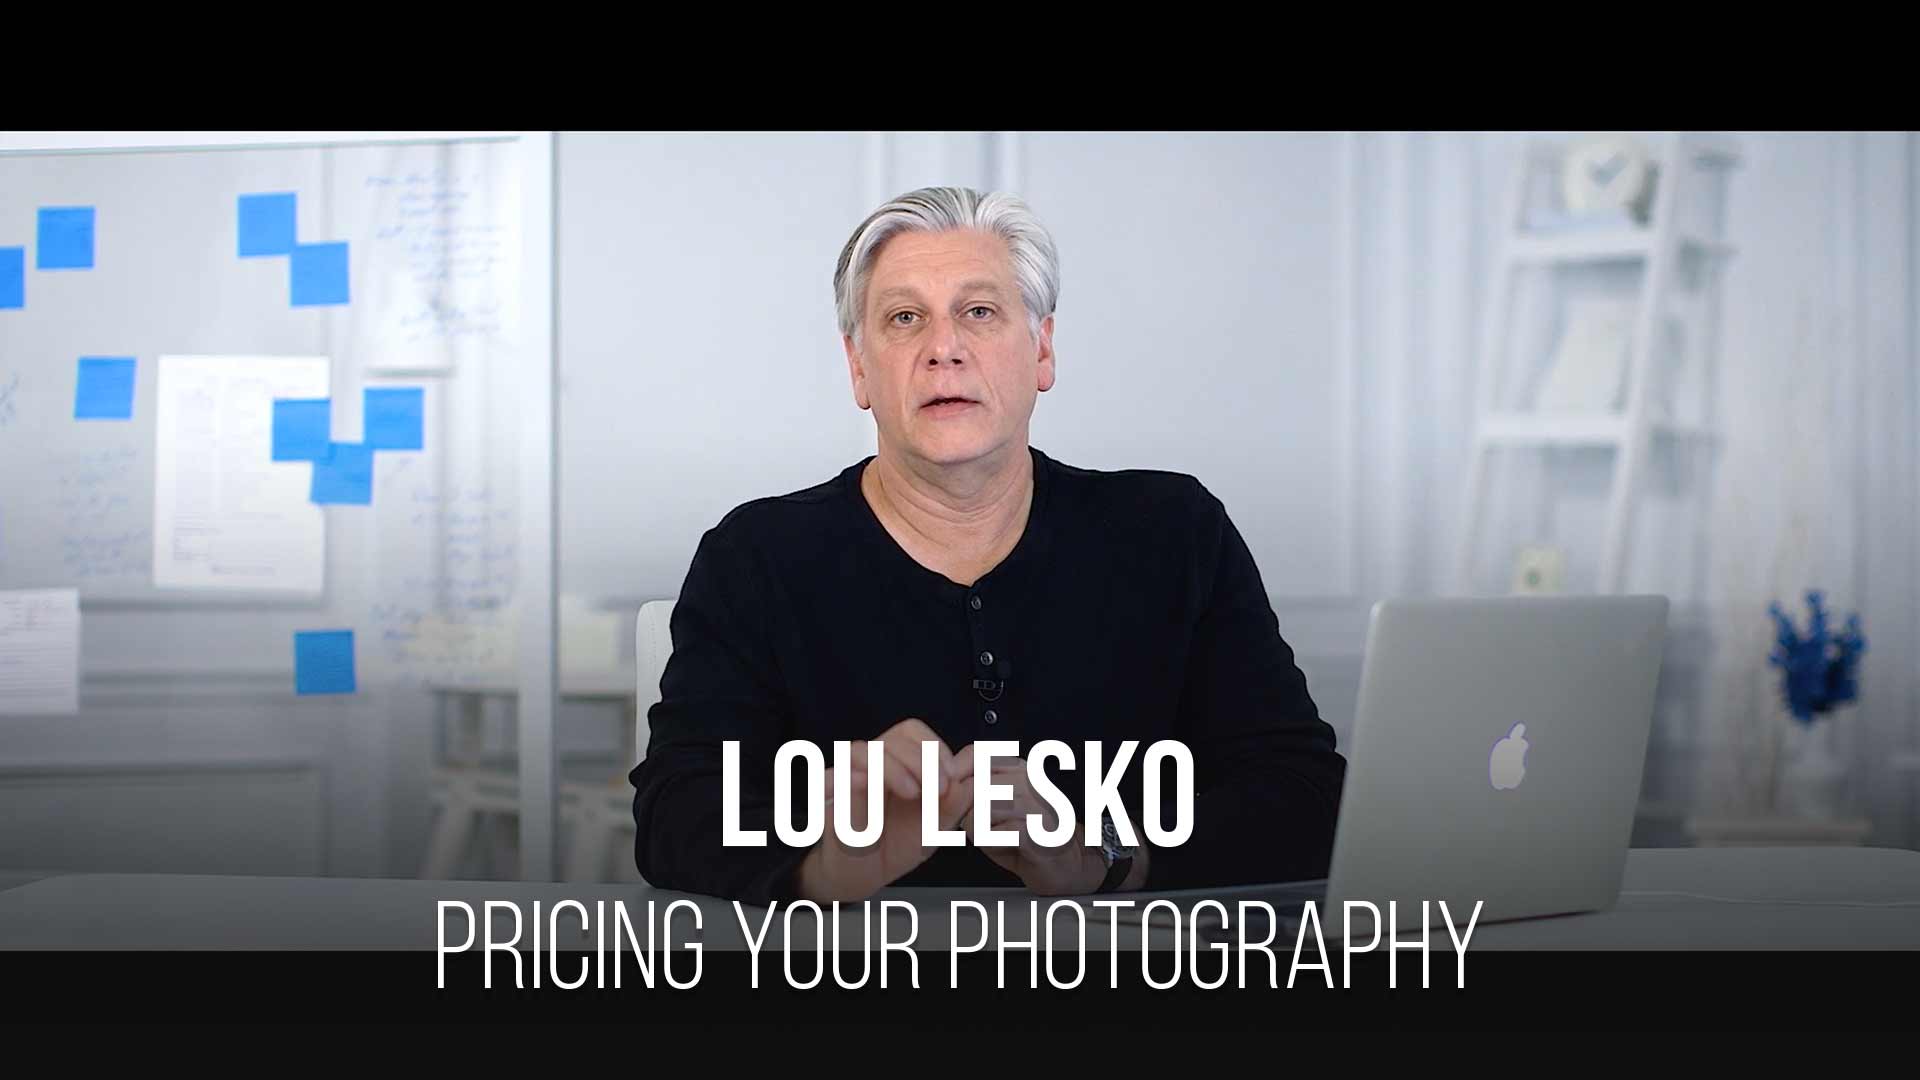 Lou Lesko is a PRO EDU instructor and a professional photographer with expertise in the business of photography.  You photography business will benefit from this course on pricing for profit.